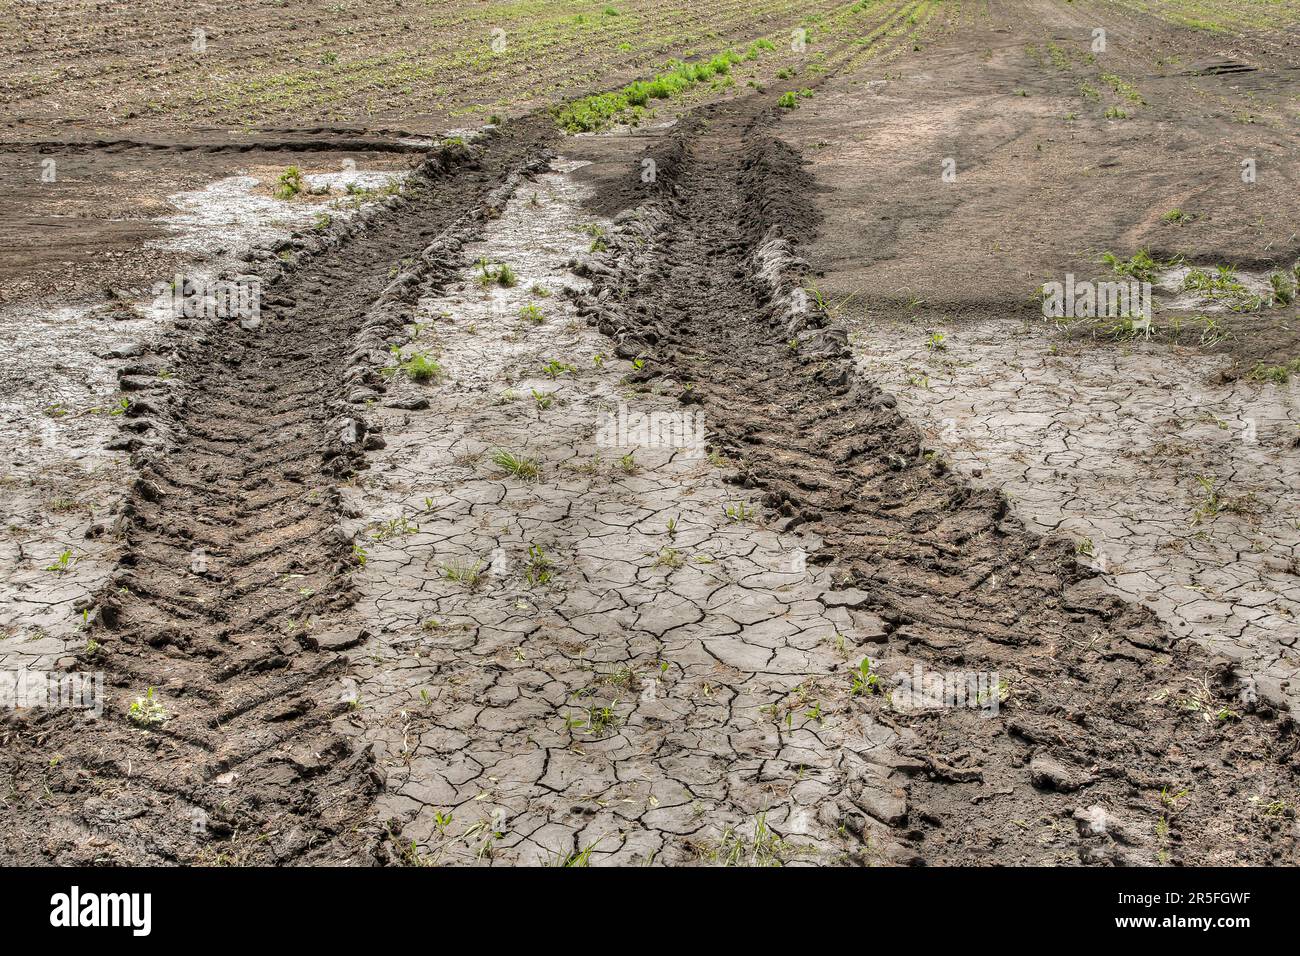 After heavy rain, deep tire tracks of a tractor are visible on the eroded field, indicating soil erosion. Stock Photo